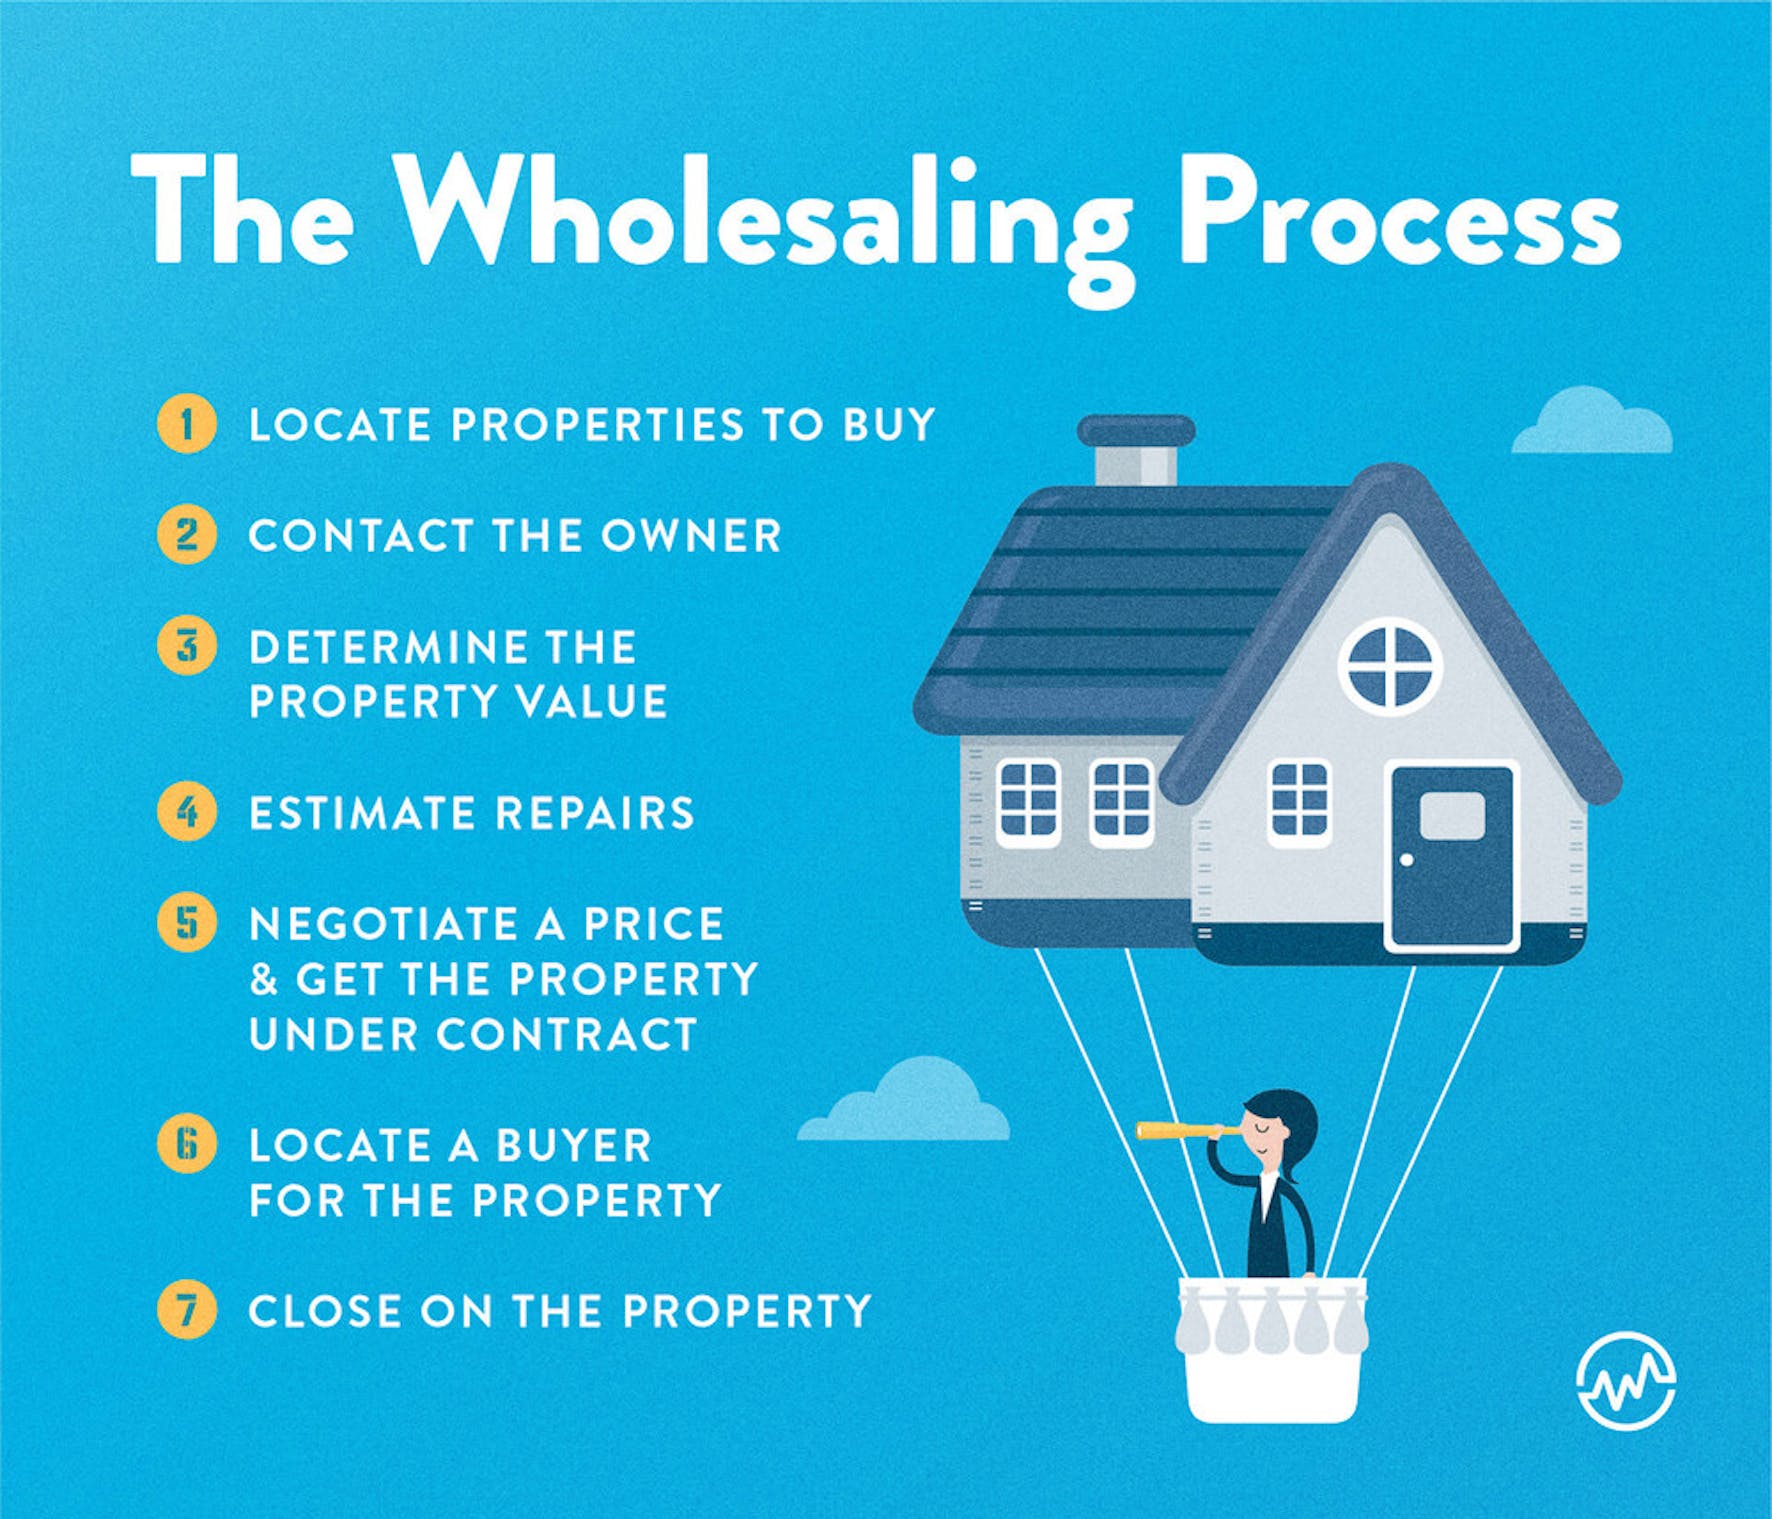 How does wholesale real estate work